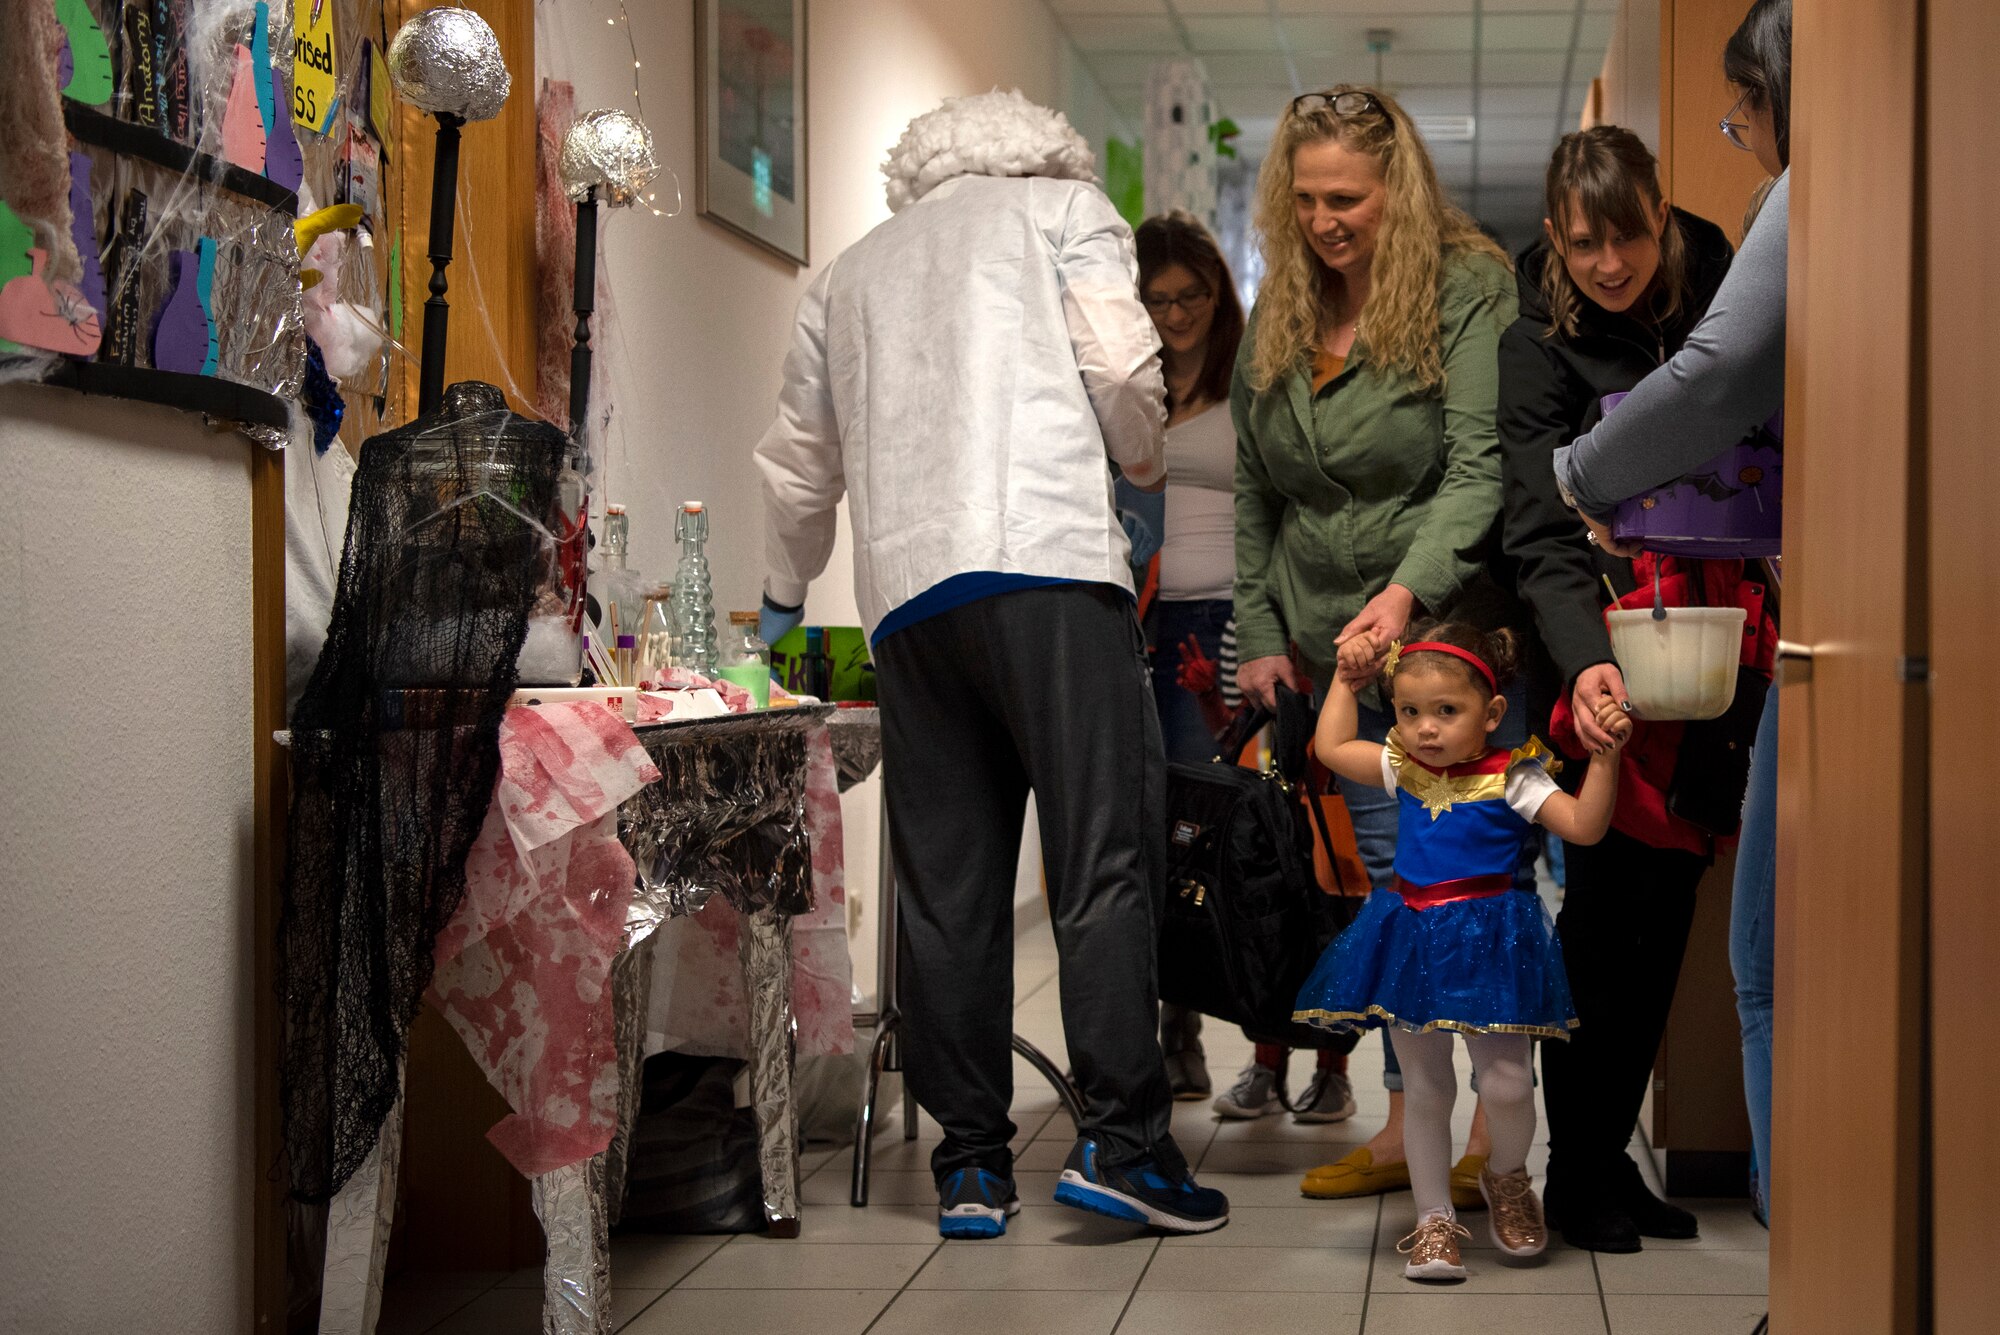 Spangdahlem Air Base families trick-or-treat in the Airman and Family Readiness Center during a deployed-family event at Spangdahlem AB, Germany, Oct. 17, 2019. Volunteers representing different units decorated Halloween-themed doors, dressed up, and handed out candy to deployment-affected families. (U.S. Air Force photo by Airman 1st Class Valerie Seelye)